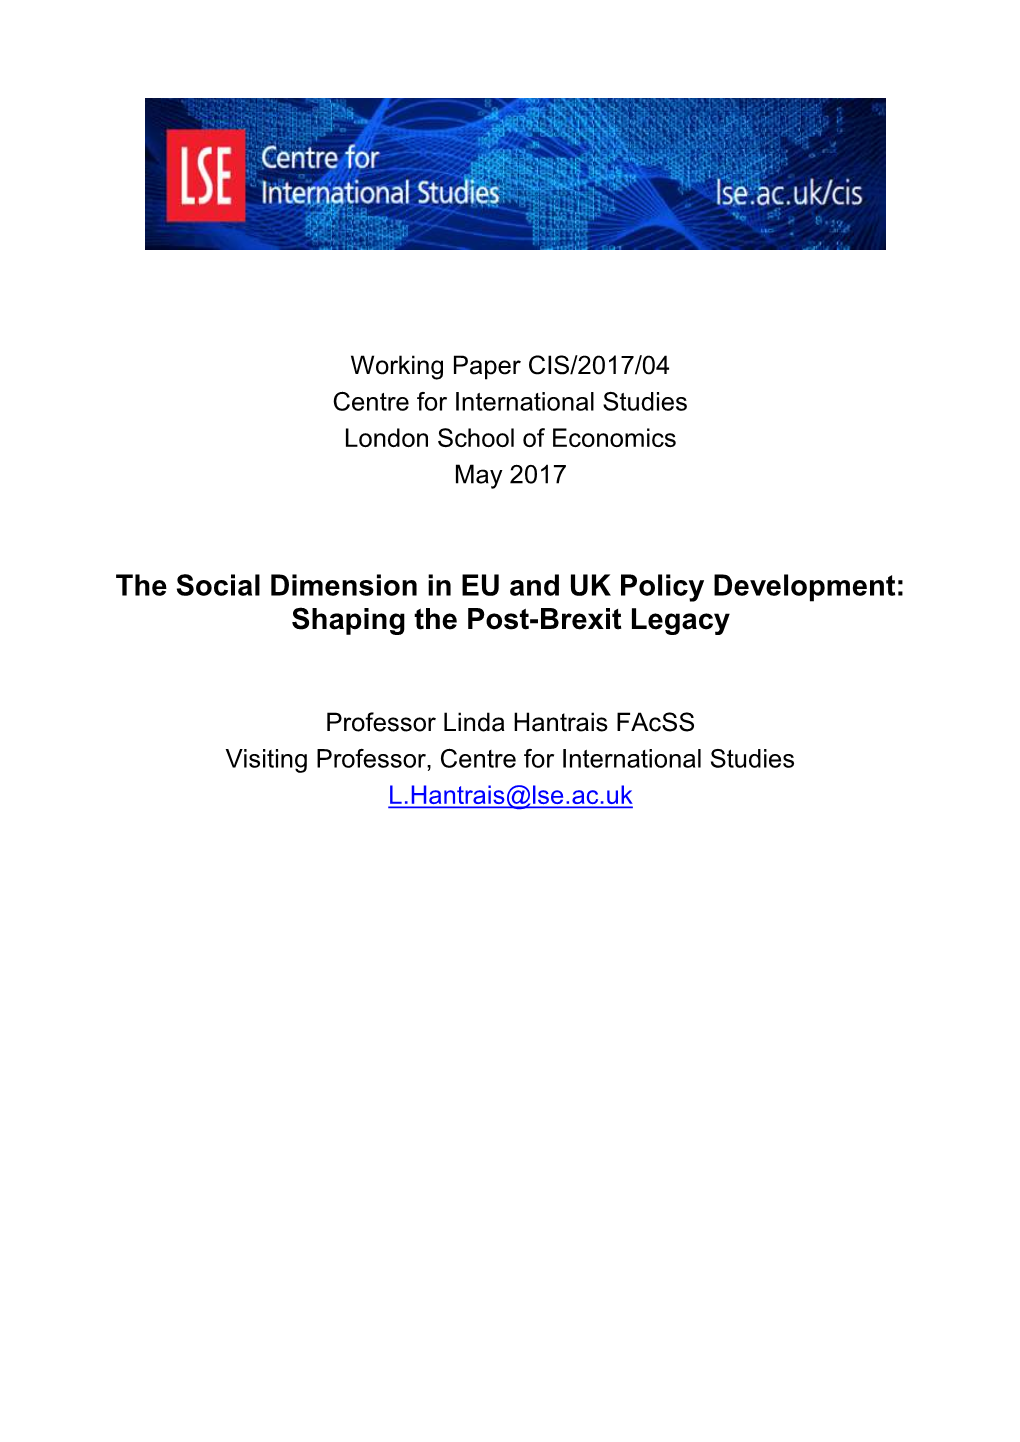 The Social Dimension in EU and UK Policy Development: Shaping the Post-Brexit Legacy